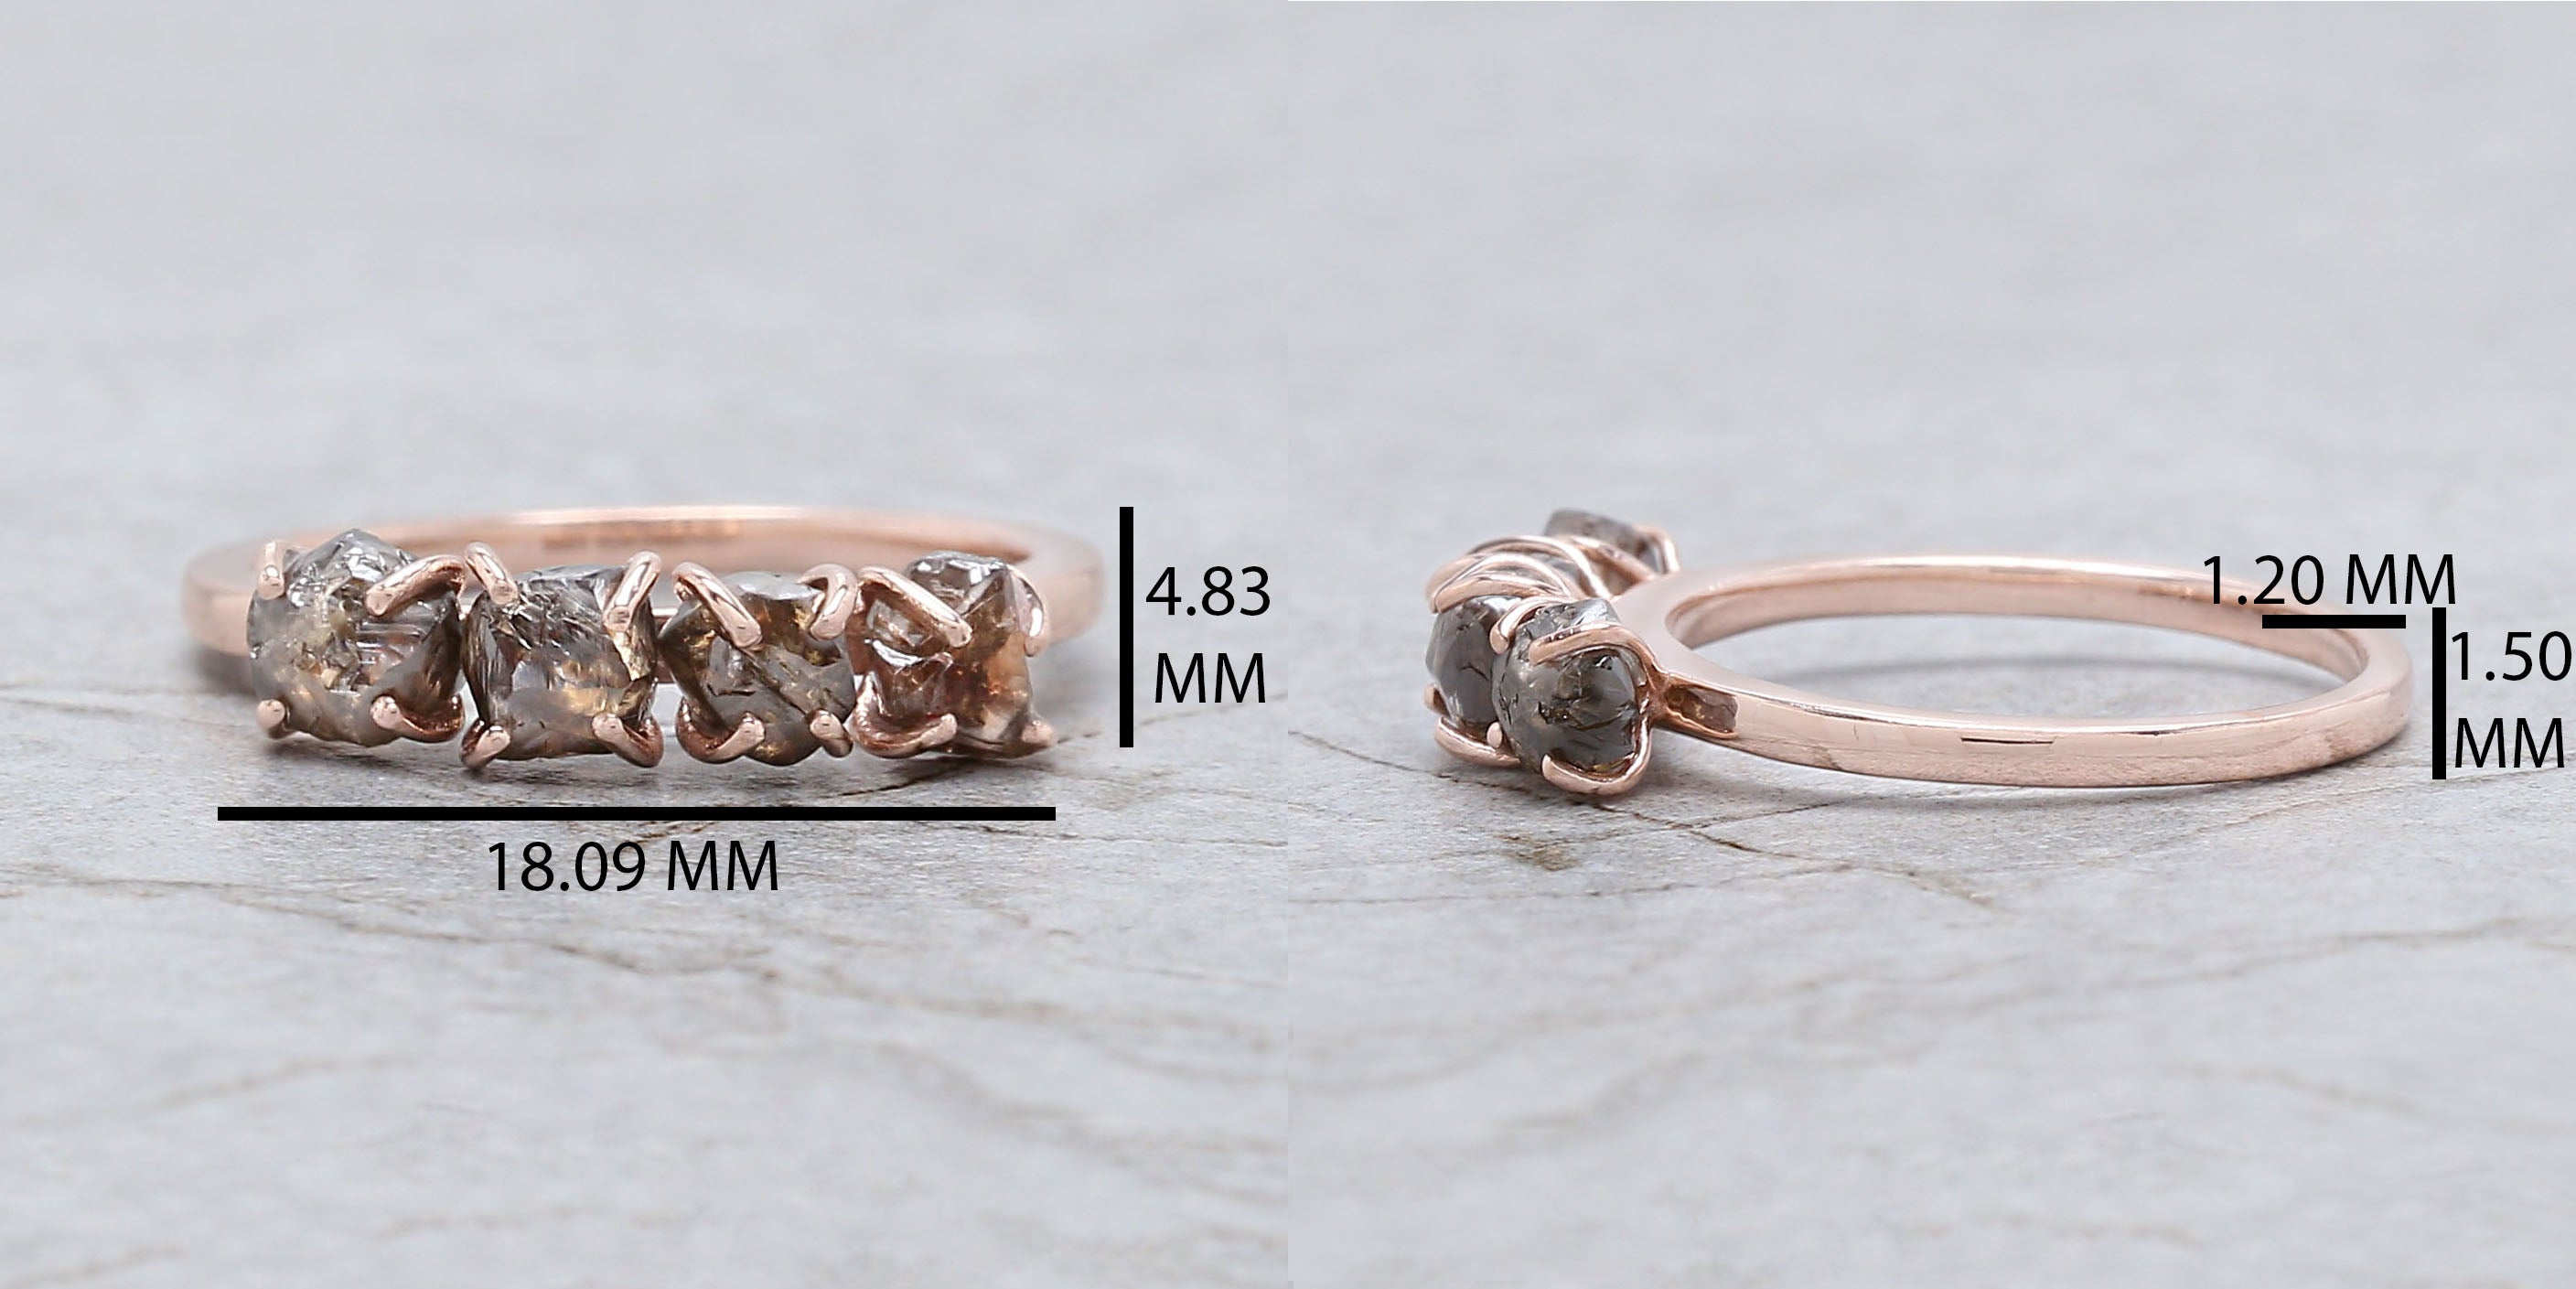 Rough Brown Color Diamond Ring 2.10 Ct 4.70 MM Irregular Rough Diamond Ring 14K Solid Rose Gold Silver Engagement Ring Gift For Her QL7976